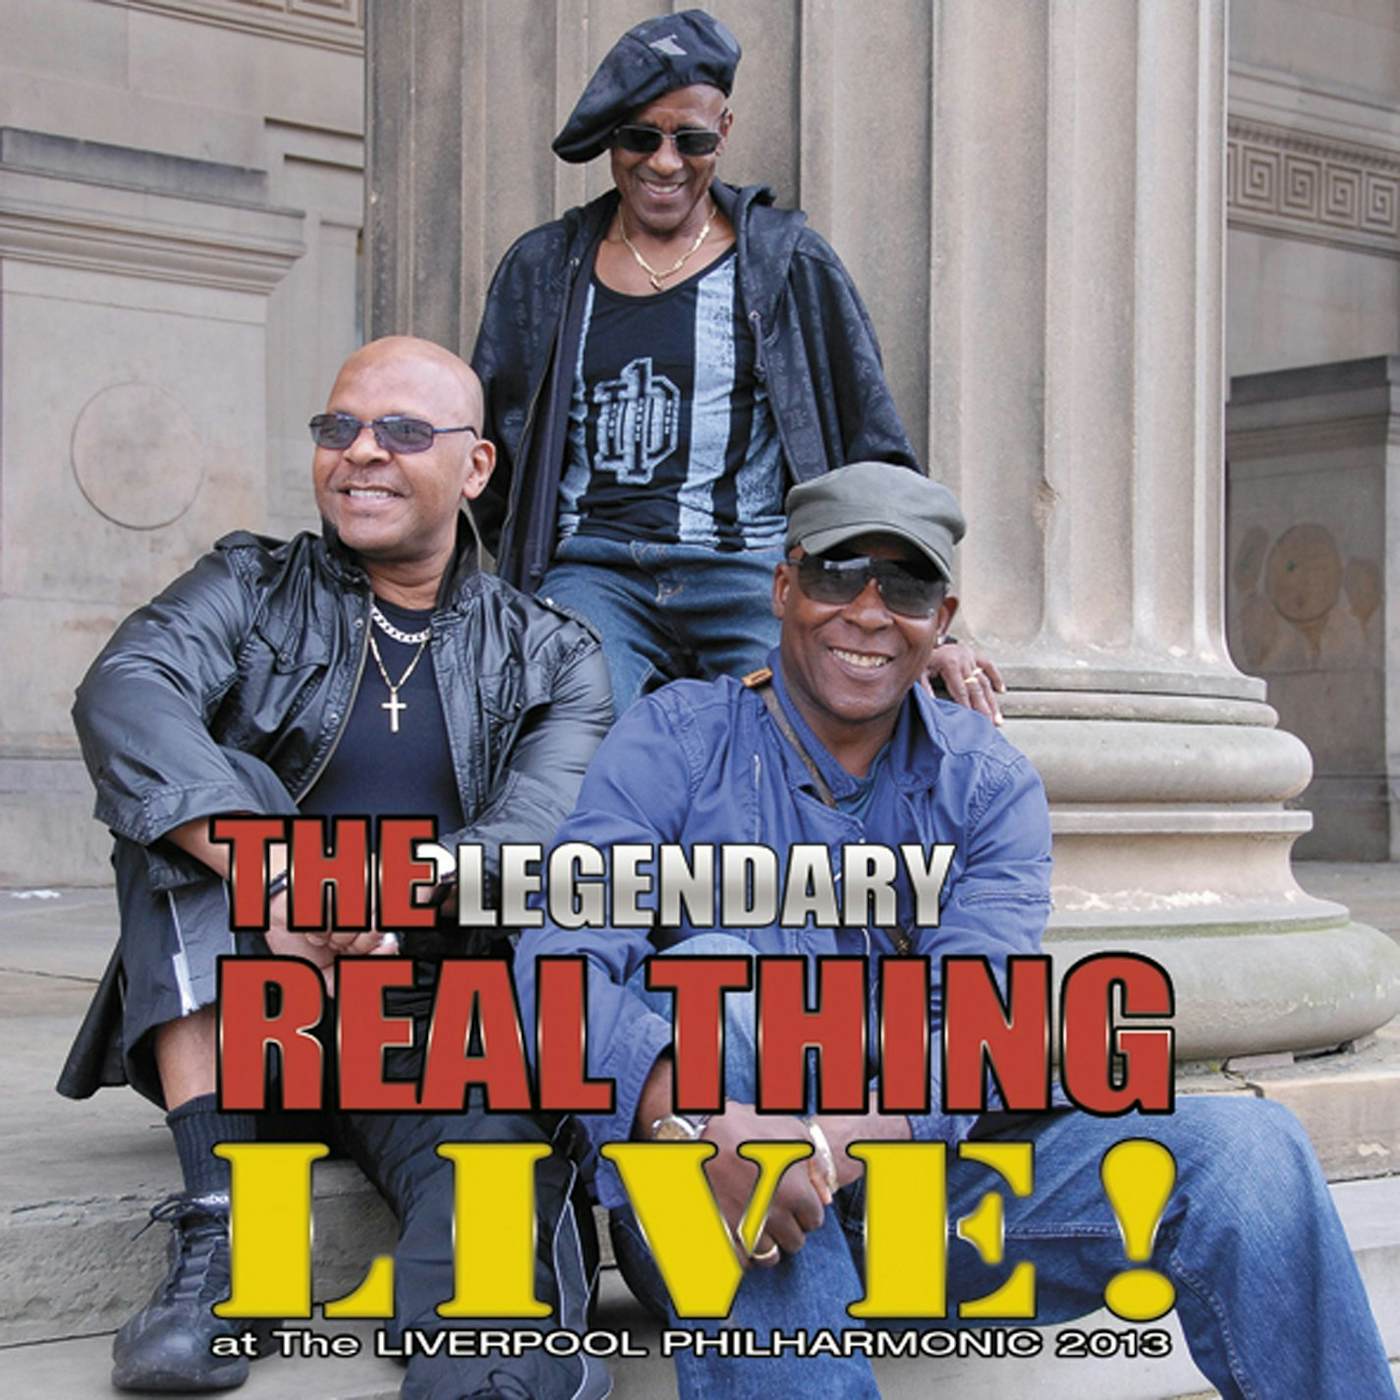 The Real Thing LIVE AT THE LIVERPOOL PHILHARMONIC 2013 CD